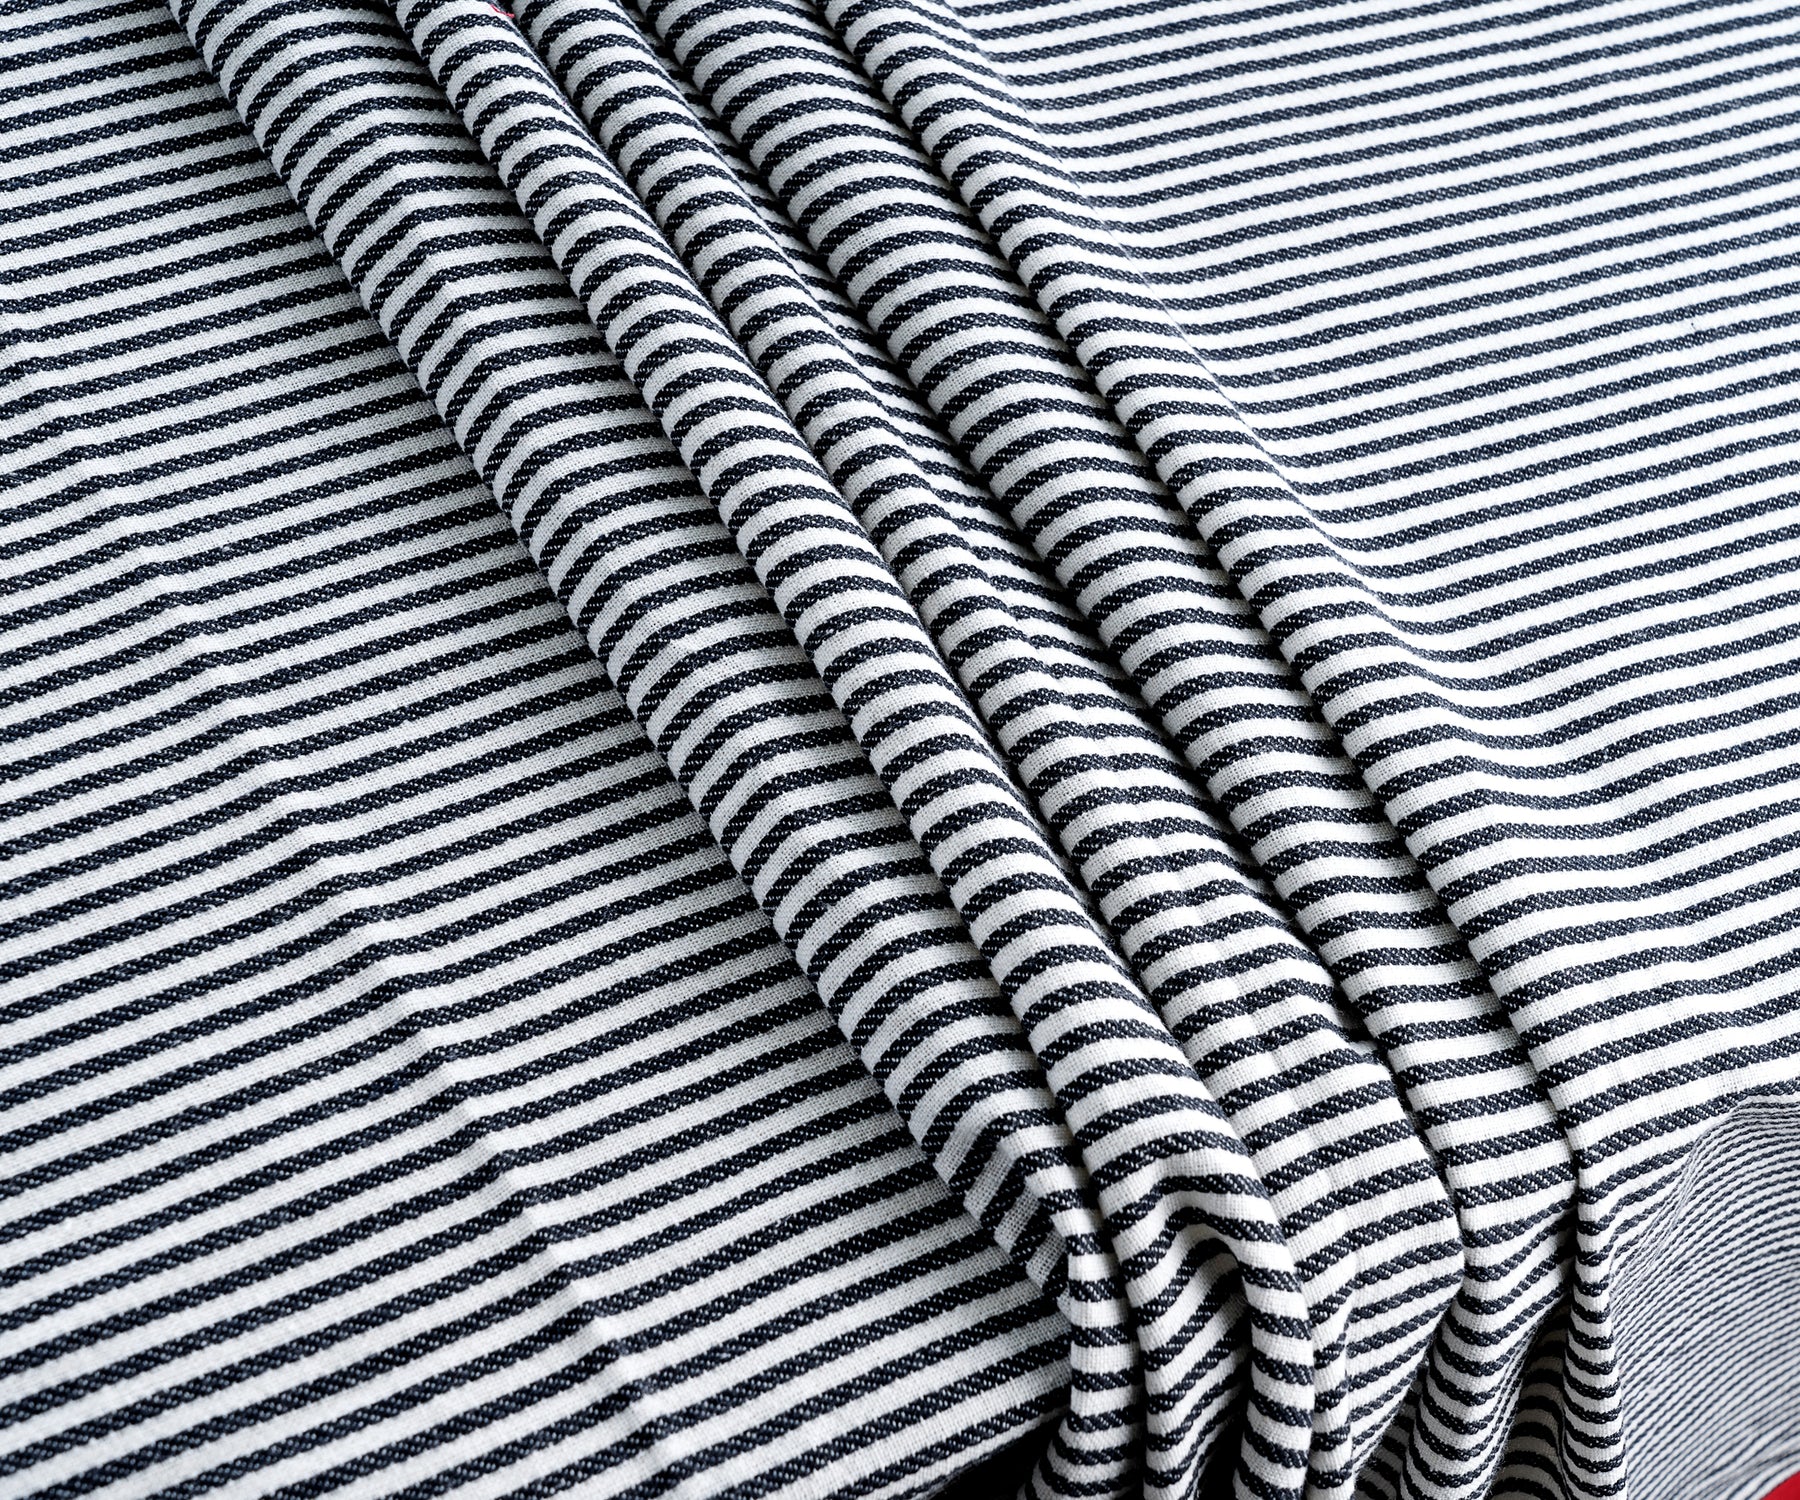 Close-up view of black and white striped Farmhouse tablecloth fabric